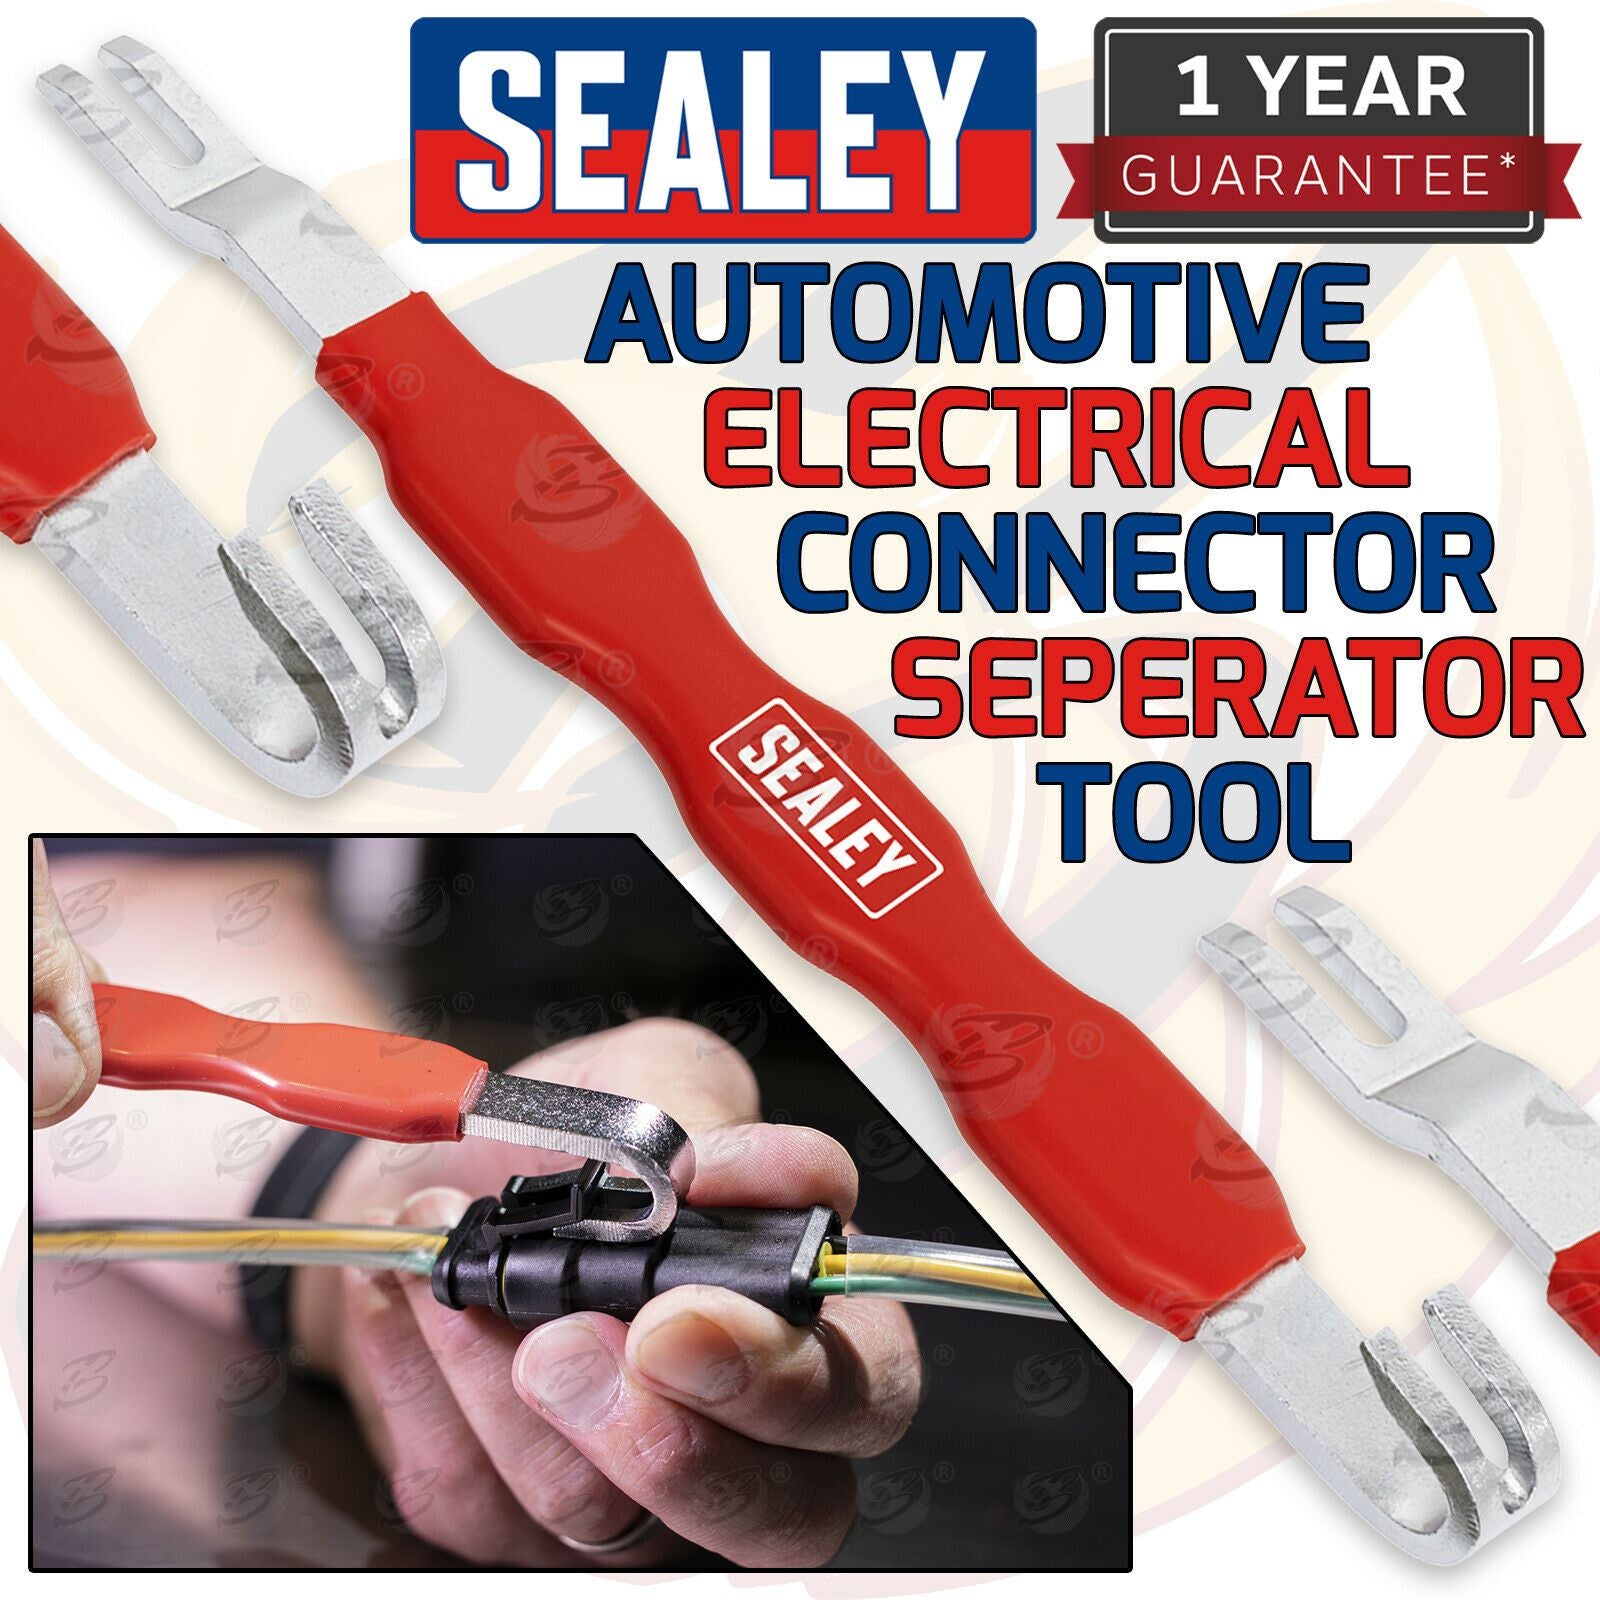 SEALEY AUTOMOTIVE ELECTRICAL CONNECTOR & SEPERATOR